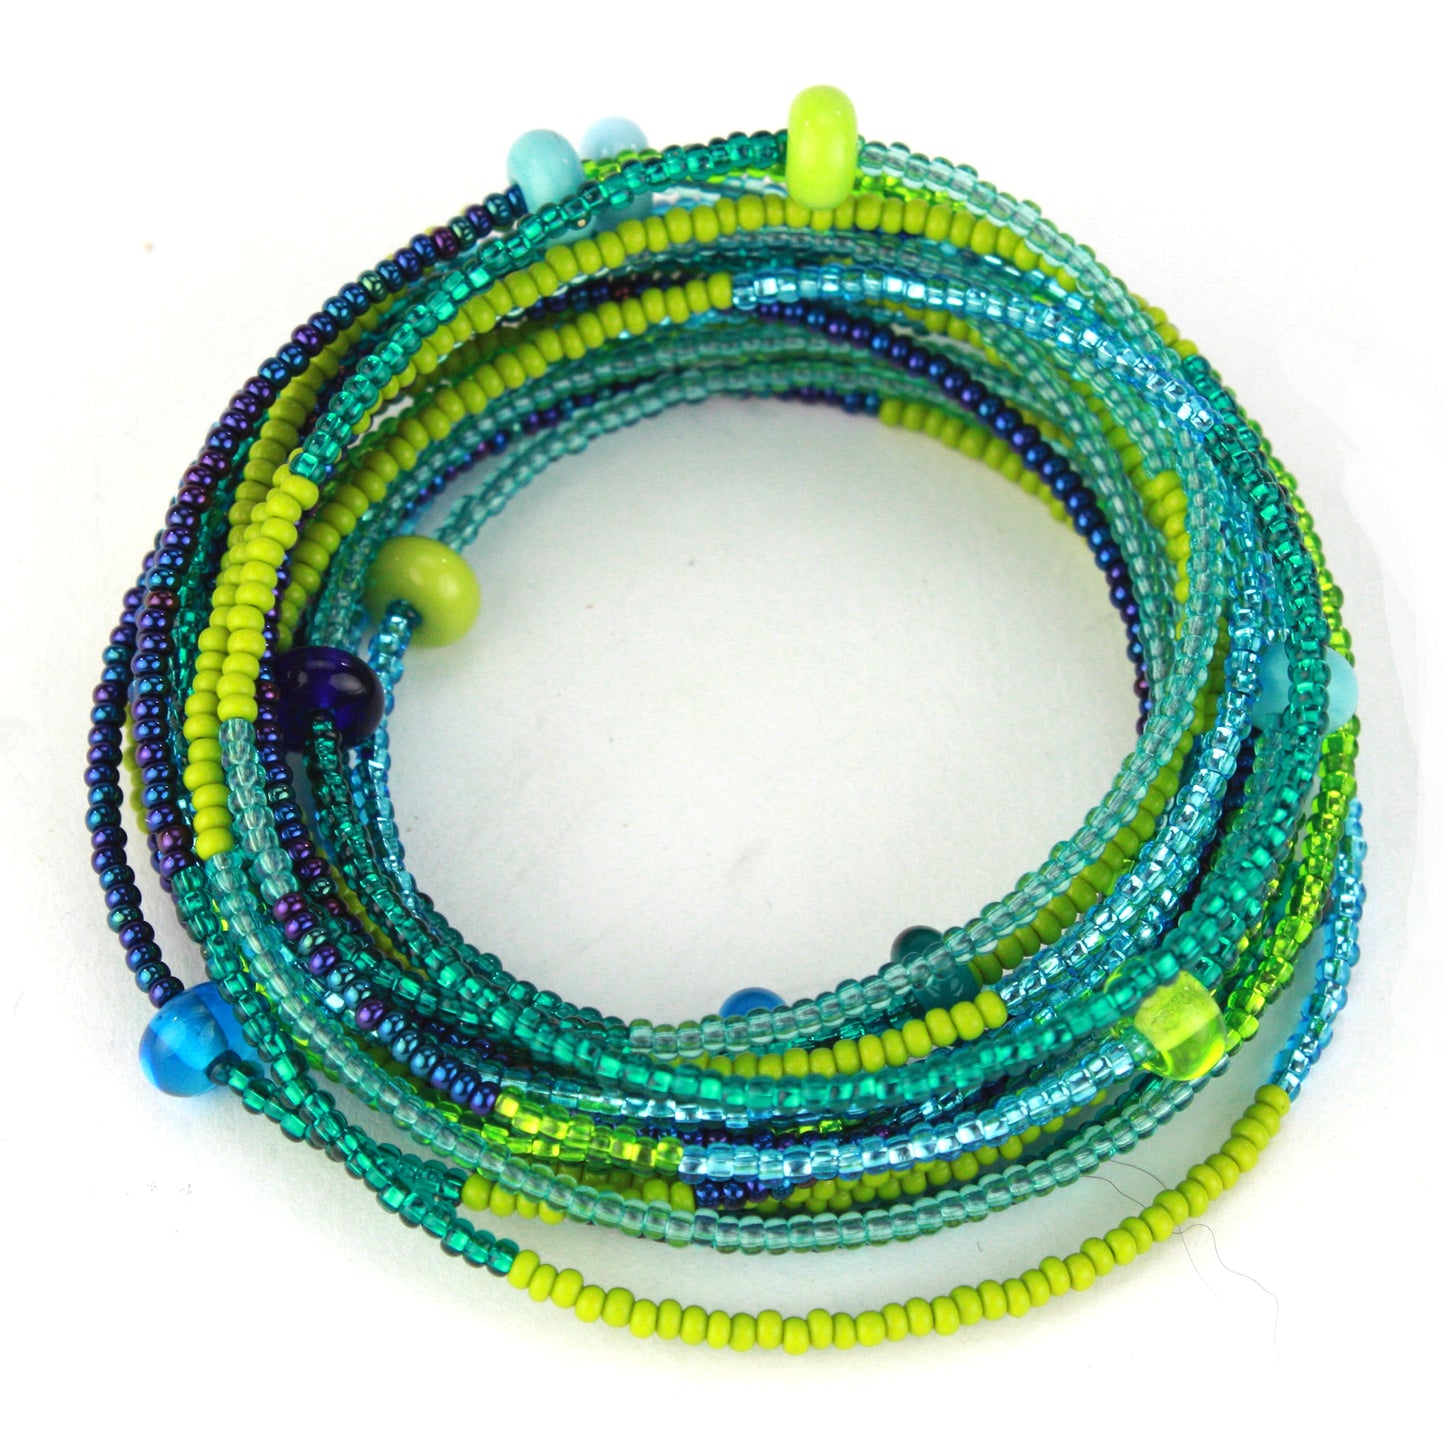 12 foot necklace - Blues and greens